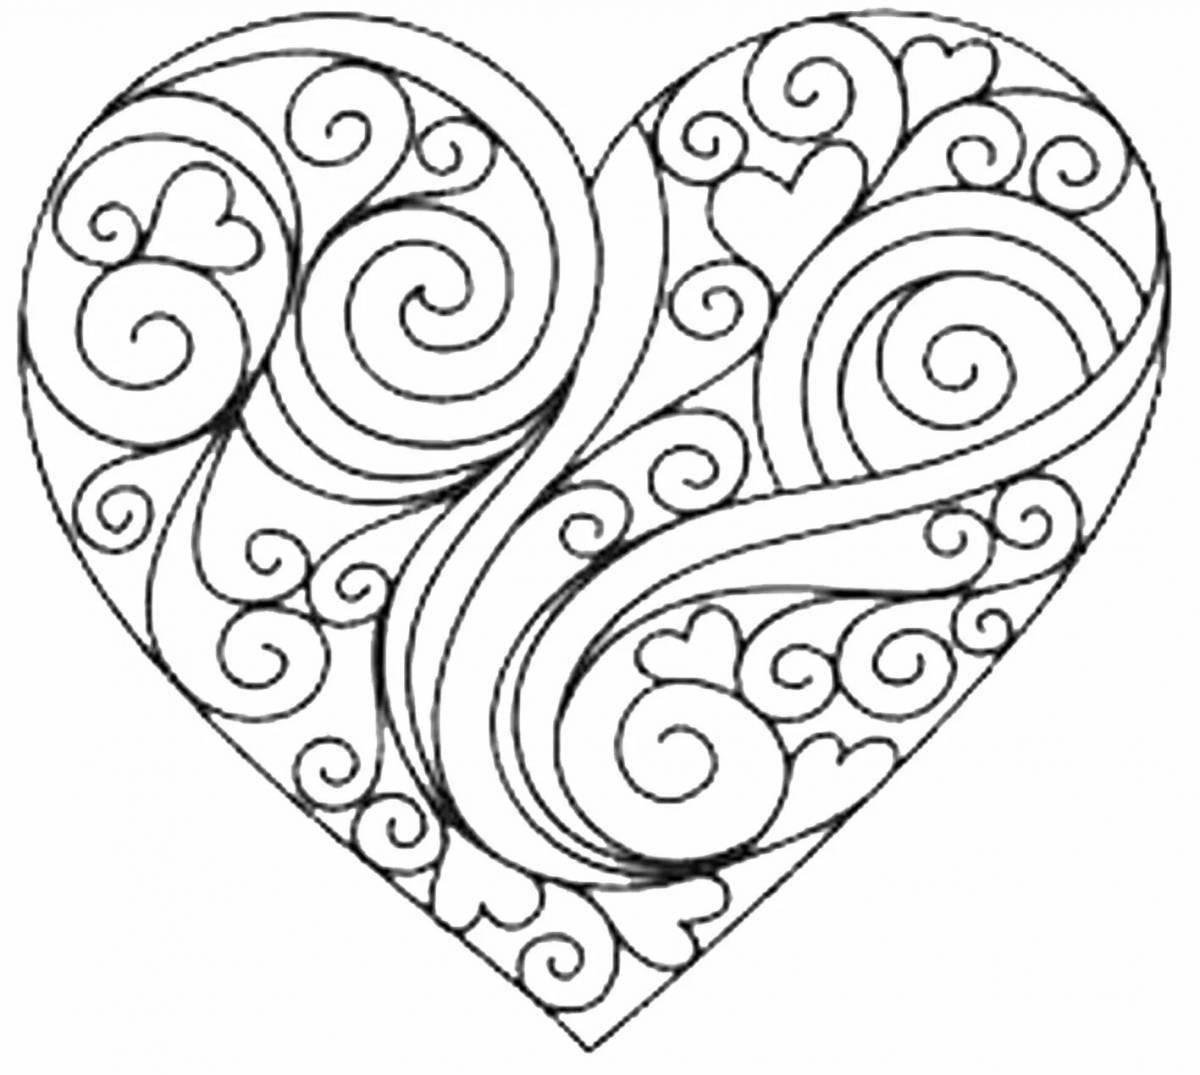 Intricate heart coloring page